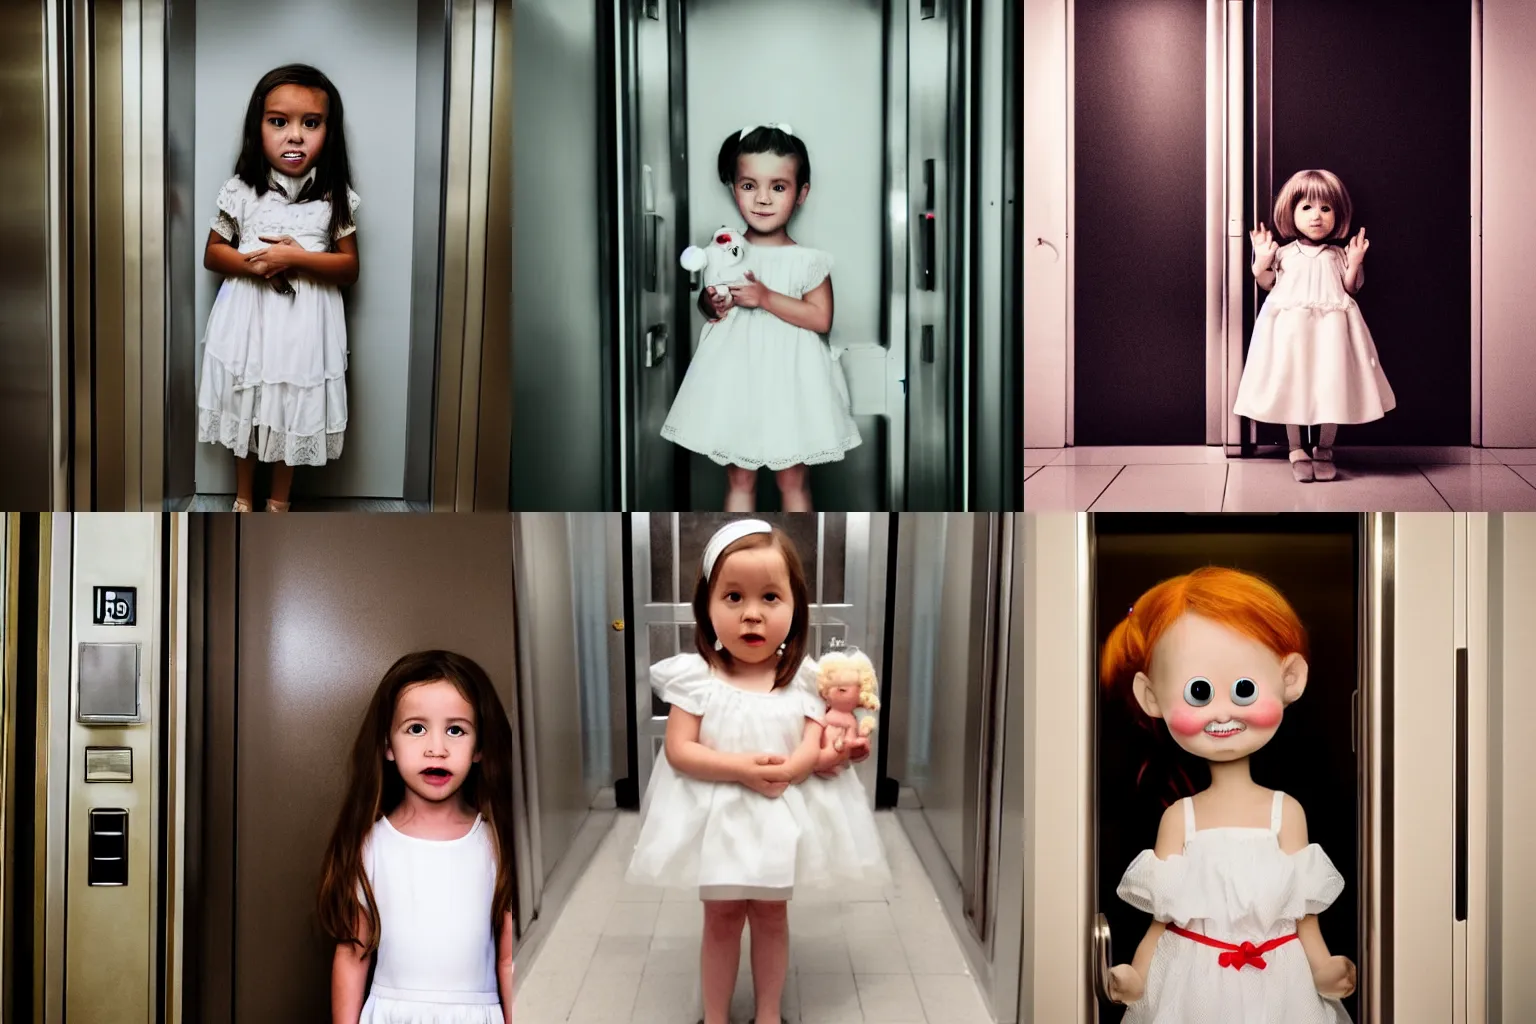 Prompt: scary photo of a scary little girl in a white dress holding a doll and standing in front of a closed elevator